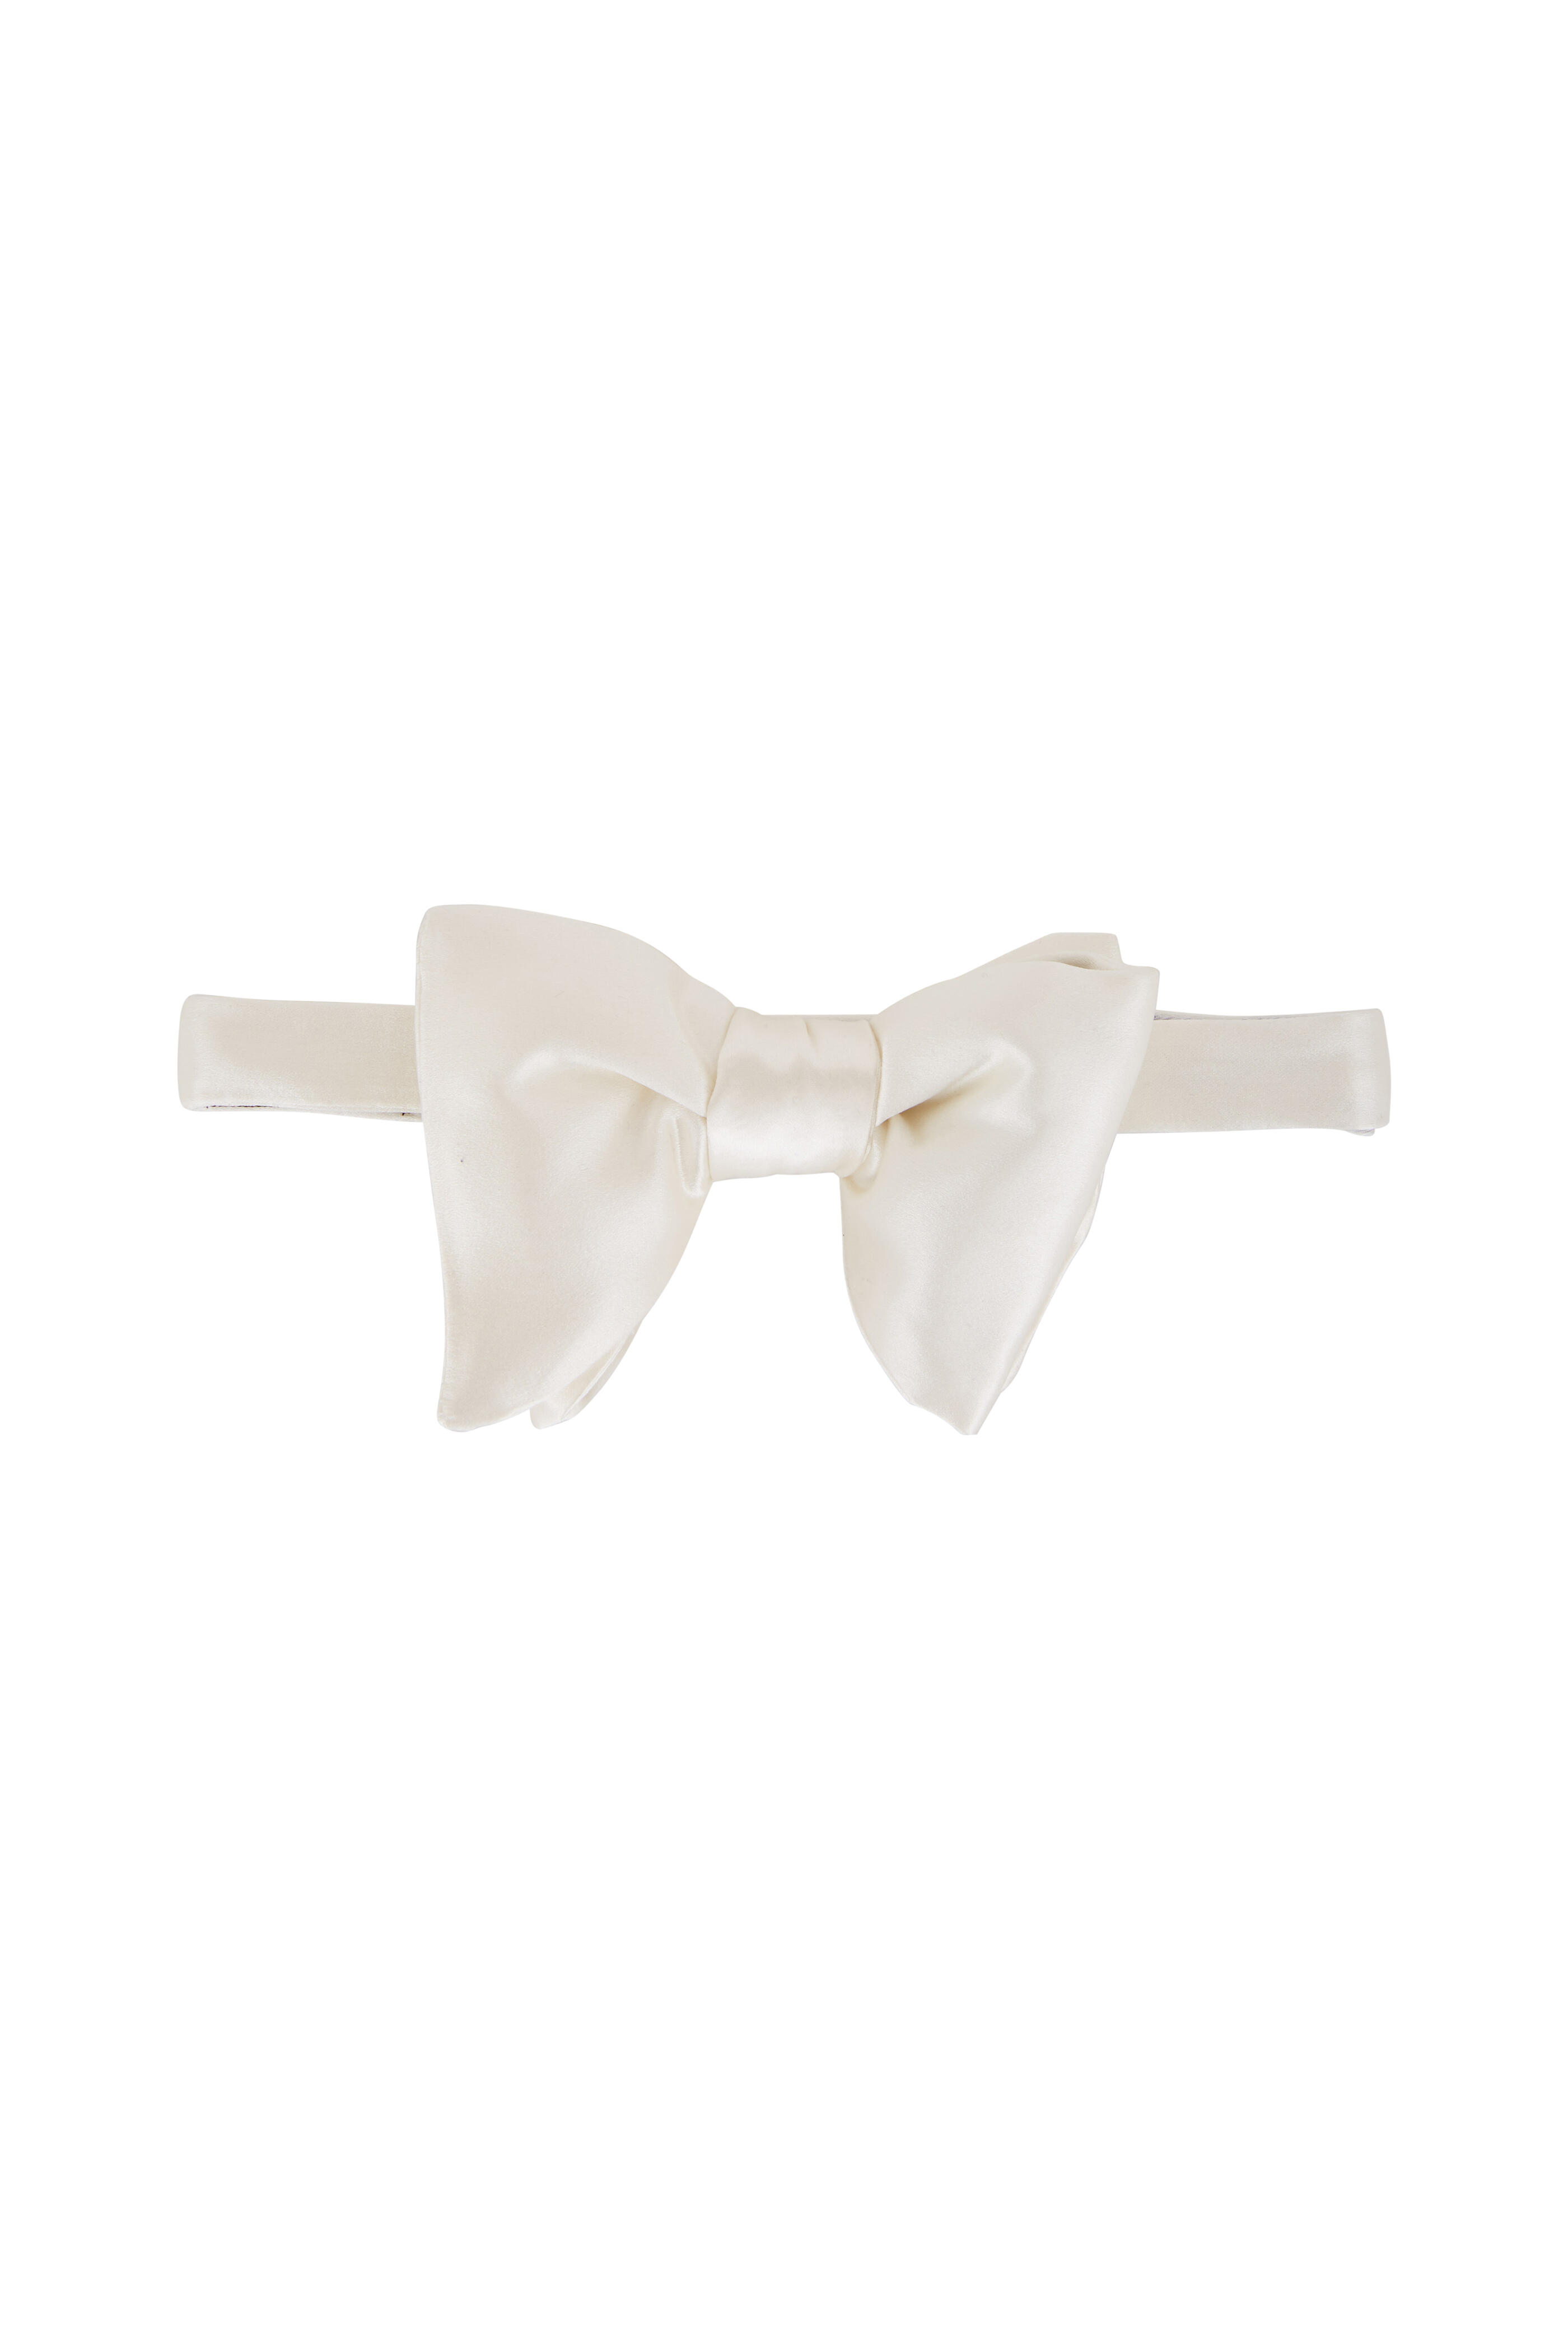 Tom Ford - White Satin Large Evening Bow Tie | Mitchell Stores